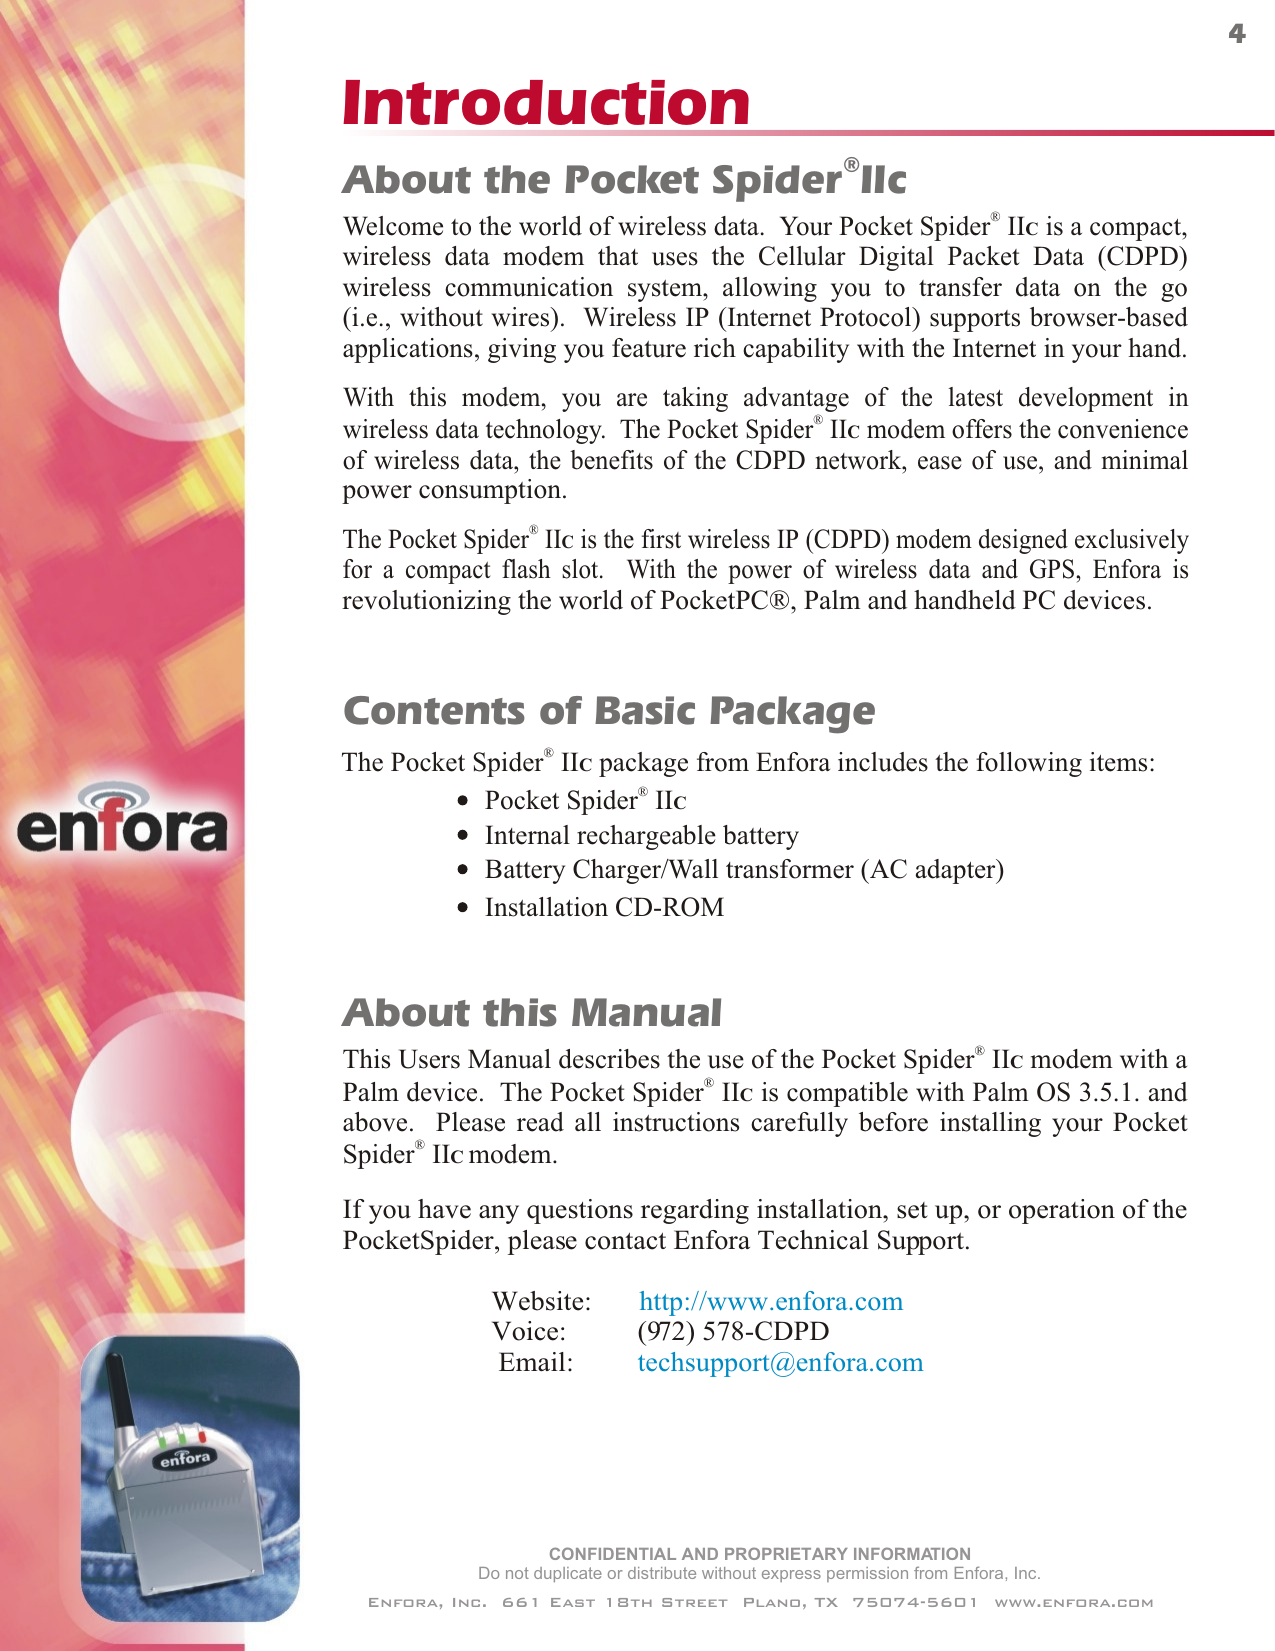 IntroductionCONFIDENTIAL AND PROPRIETARY INFORMATIONDo not duplicate or distribute without express permission from Enfora, Inc.Enfora, Inc.  661 East 18th Street  Plano, TX  75074-5601  www.enfora.com4Contents of Basic PackageThe   package from Enfora includes the following items:®Pocket Spider  IIC®Pocket Spider  IICInternal rechargeable batteryBattery Charger/Wall transformer (AC adapter)Installation CD-ROM®Welcome to the world of wireless data.  Your Pocket Spider  II  is a compact,wireless data modem that uses the Cellular Digital Packet Data (CDPD)wireless communication system, allowing you to transfer data on the go(i.e., without wires).  Wireless IP (Internet Protocol) supports browser-basedapplications, giving you feature rich capability with the Internet in your hand.CThe   is the first wireless IP (CDPD) modem designed exclusivelyfor a compact flash slot.  With the power of wireless data and GPS, Enfora is®Pocket Spider  IICWith this modem, you are taking advantage of the latest development in®wireless data technology.  The Pocket Spider  IIC modem offers the convenienceof wireless data, the benefits of the CDPD network, ease of use, and minimalpower consumption.®About the Pocket Spider IIcrevolutionizing the world of PocketPC®, Palm and handheld PC devices. This Users Manual describes the use of the   modem with aPalm device.  The   is compatible with Palm OS 3.5.1. andabove.  Please read all instructions carefully ®Pocket Spider  IIC®Pocket Spider  IICbefore installing your PocketIf you have any questions regarding installation, set up, or operation of thePocketSpider, please contact Enfora Technical Support.                     Website:                            Voice:          (972) 578-CDPD                      Email:         http://www.enfora.comtechsupport@enfora.comAbout this Manual®Spider  IIC modem.